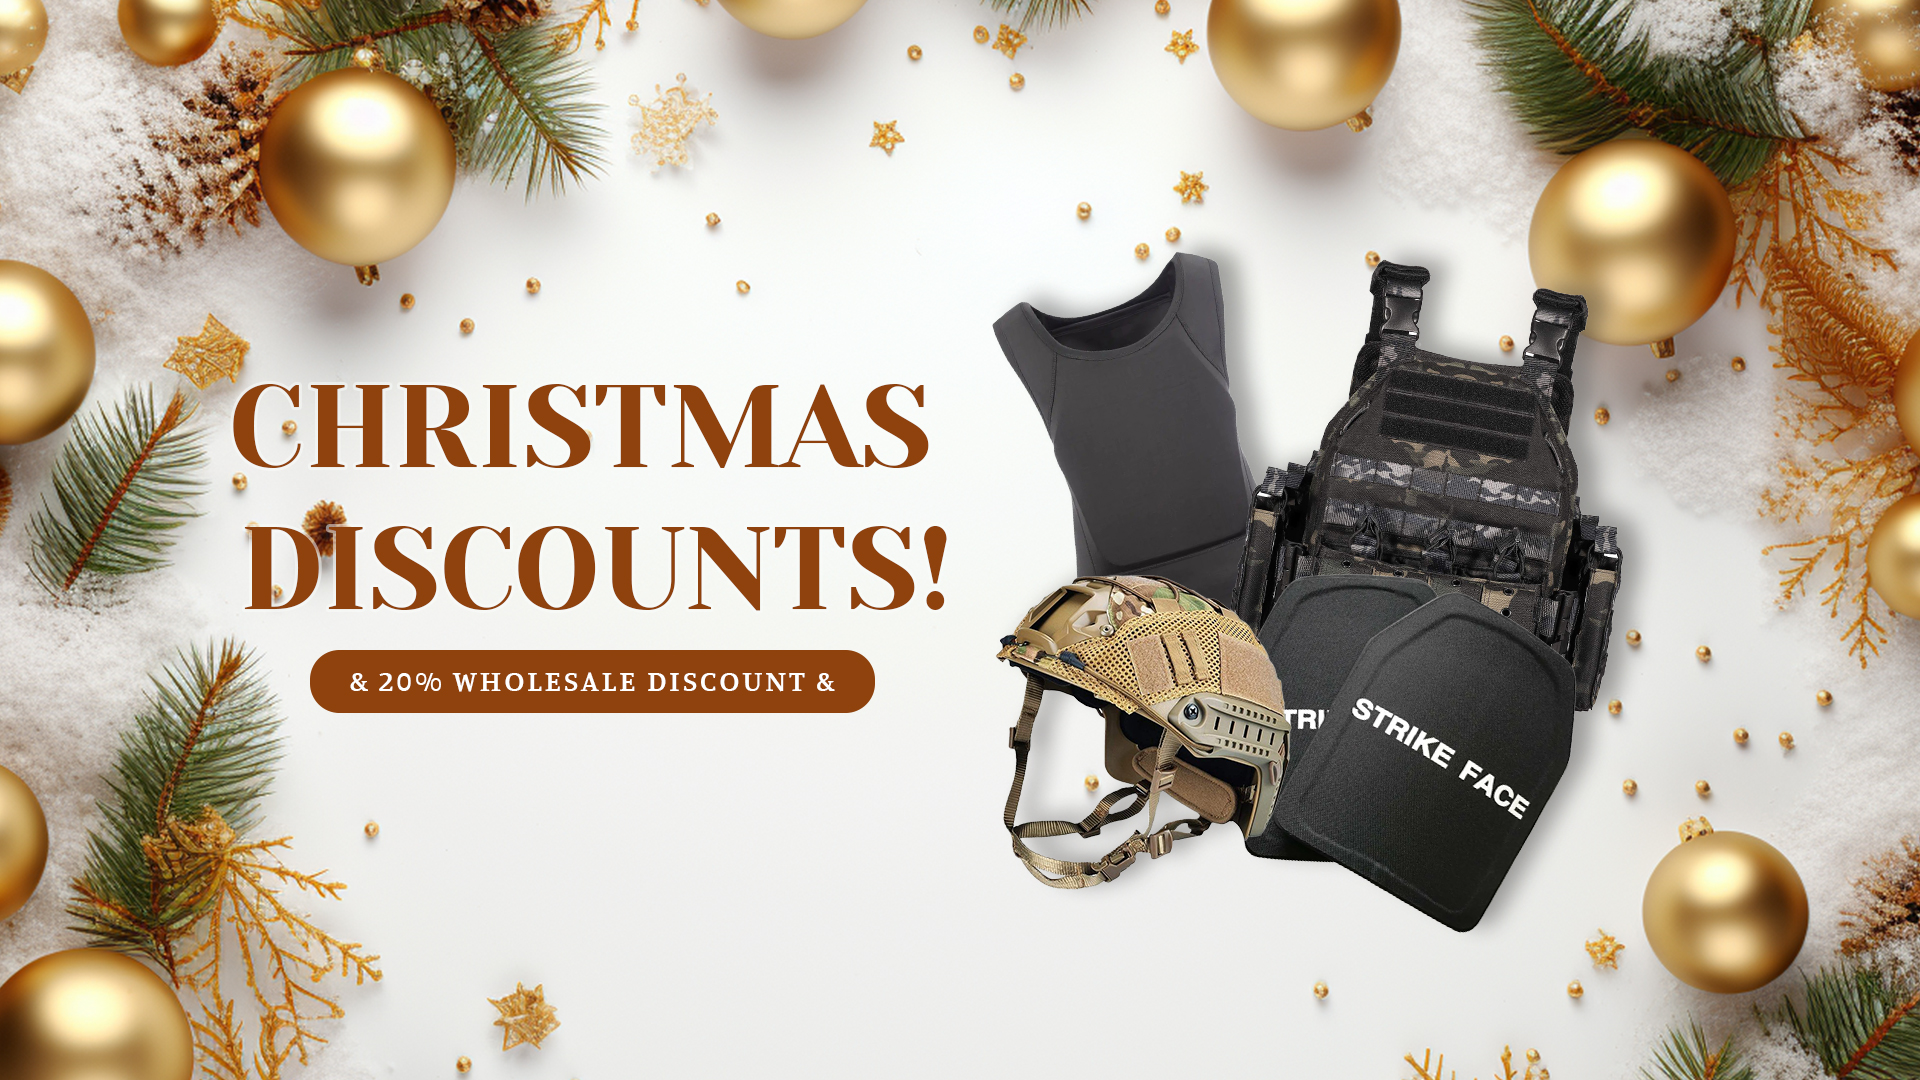 Safeguarding the Most Precious Gifts - Enjoy Efficient Security with Christmas Discounts!